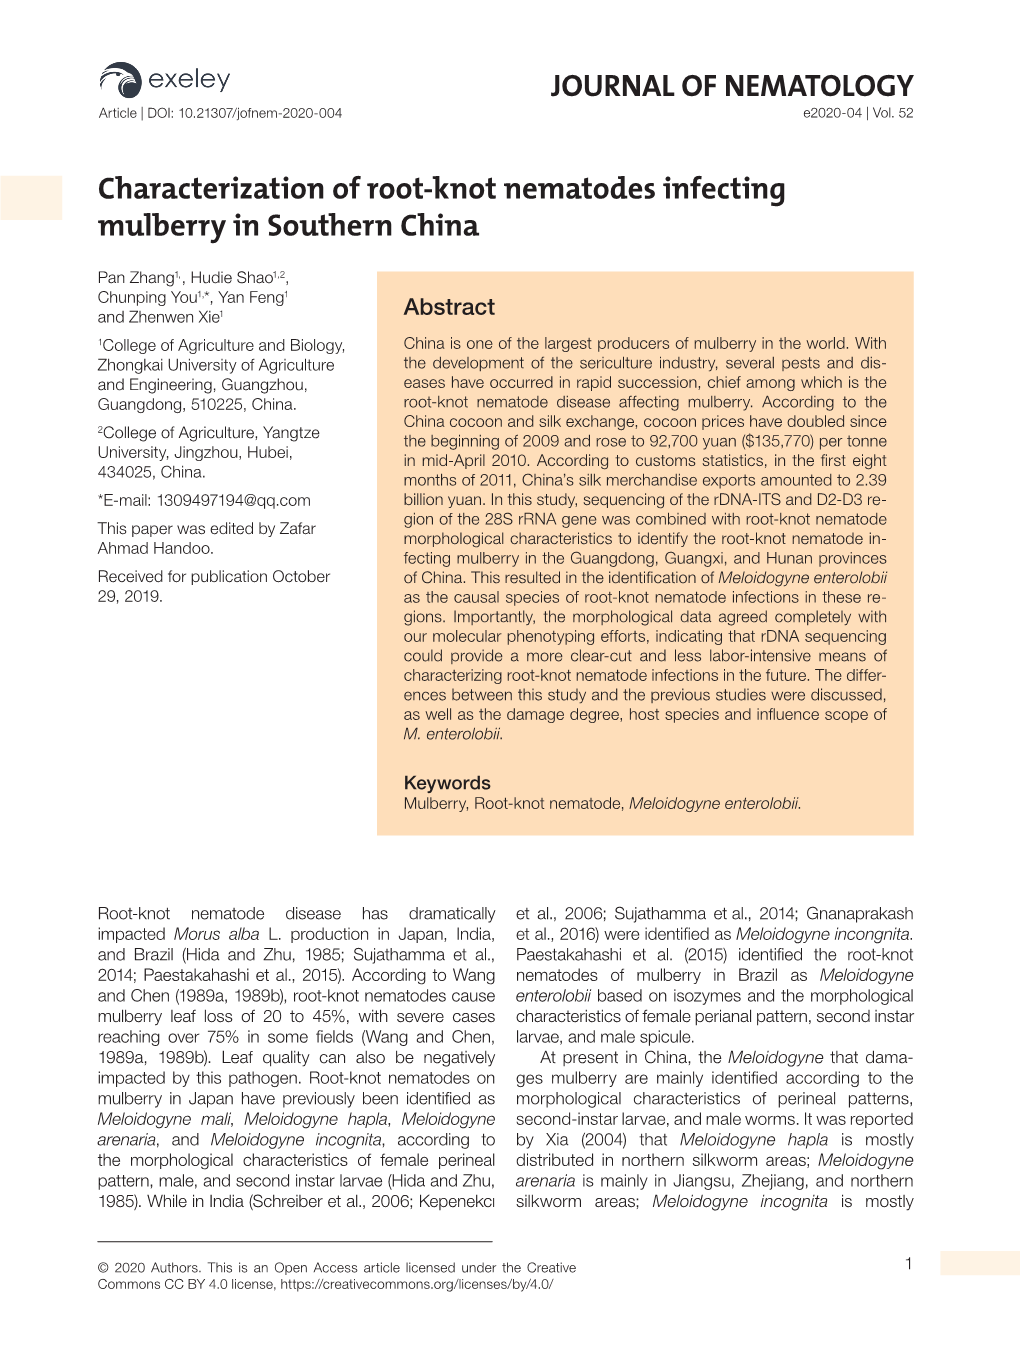 Characterization of Root-Knot Nematodes Infecting Mulberry in Southern China